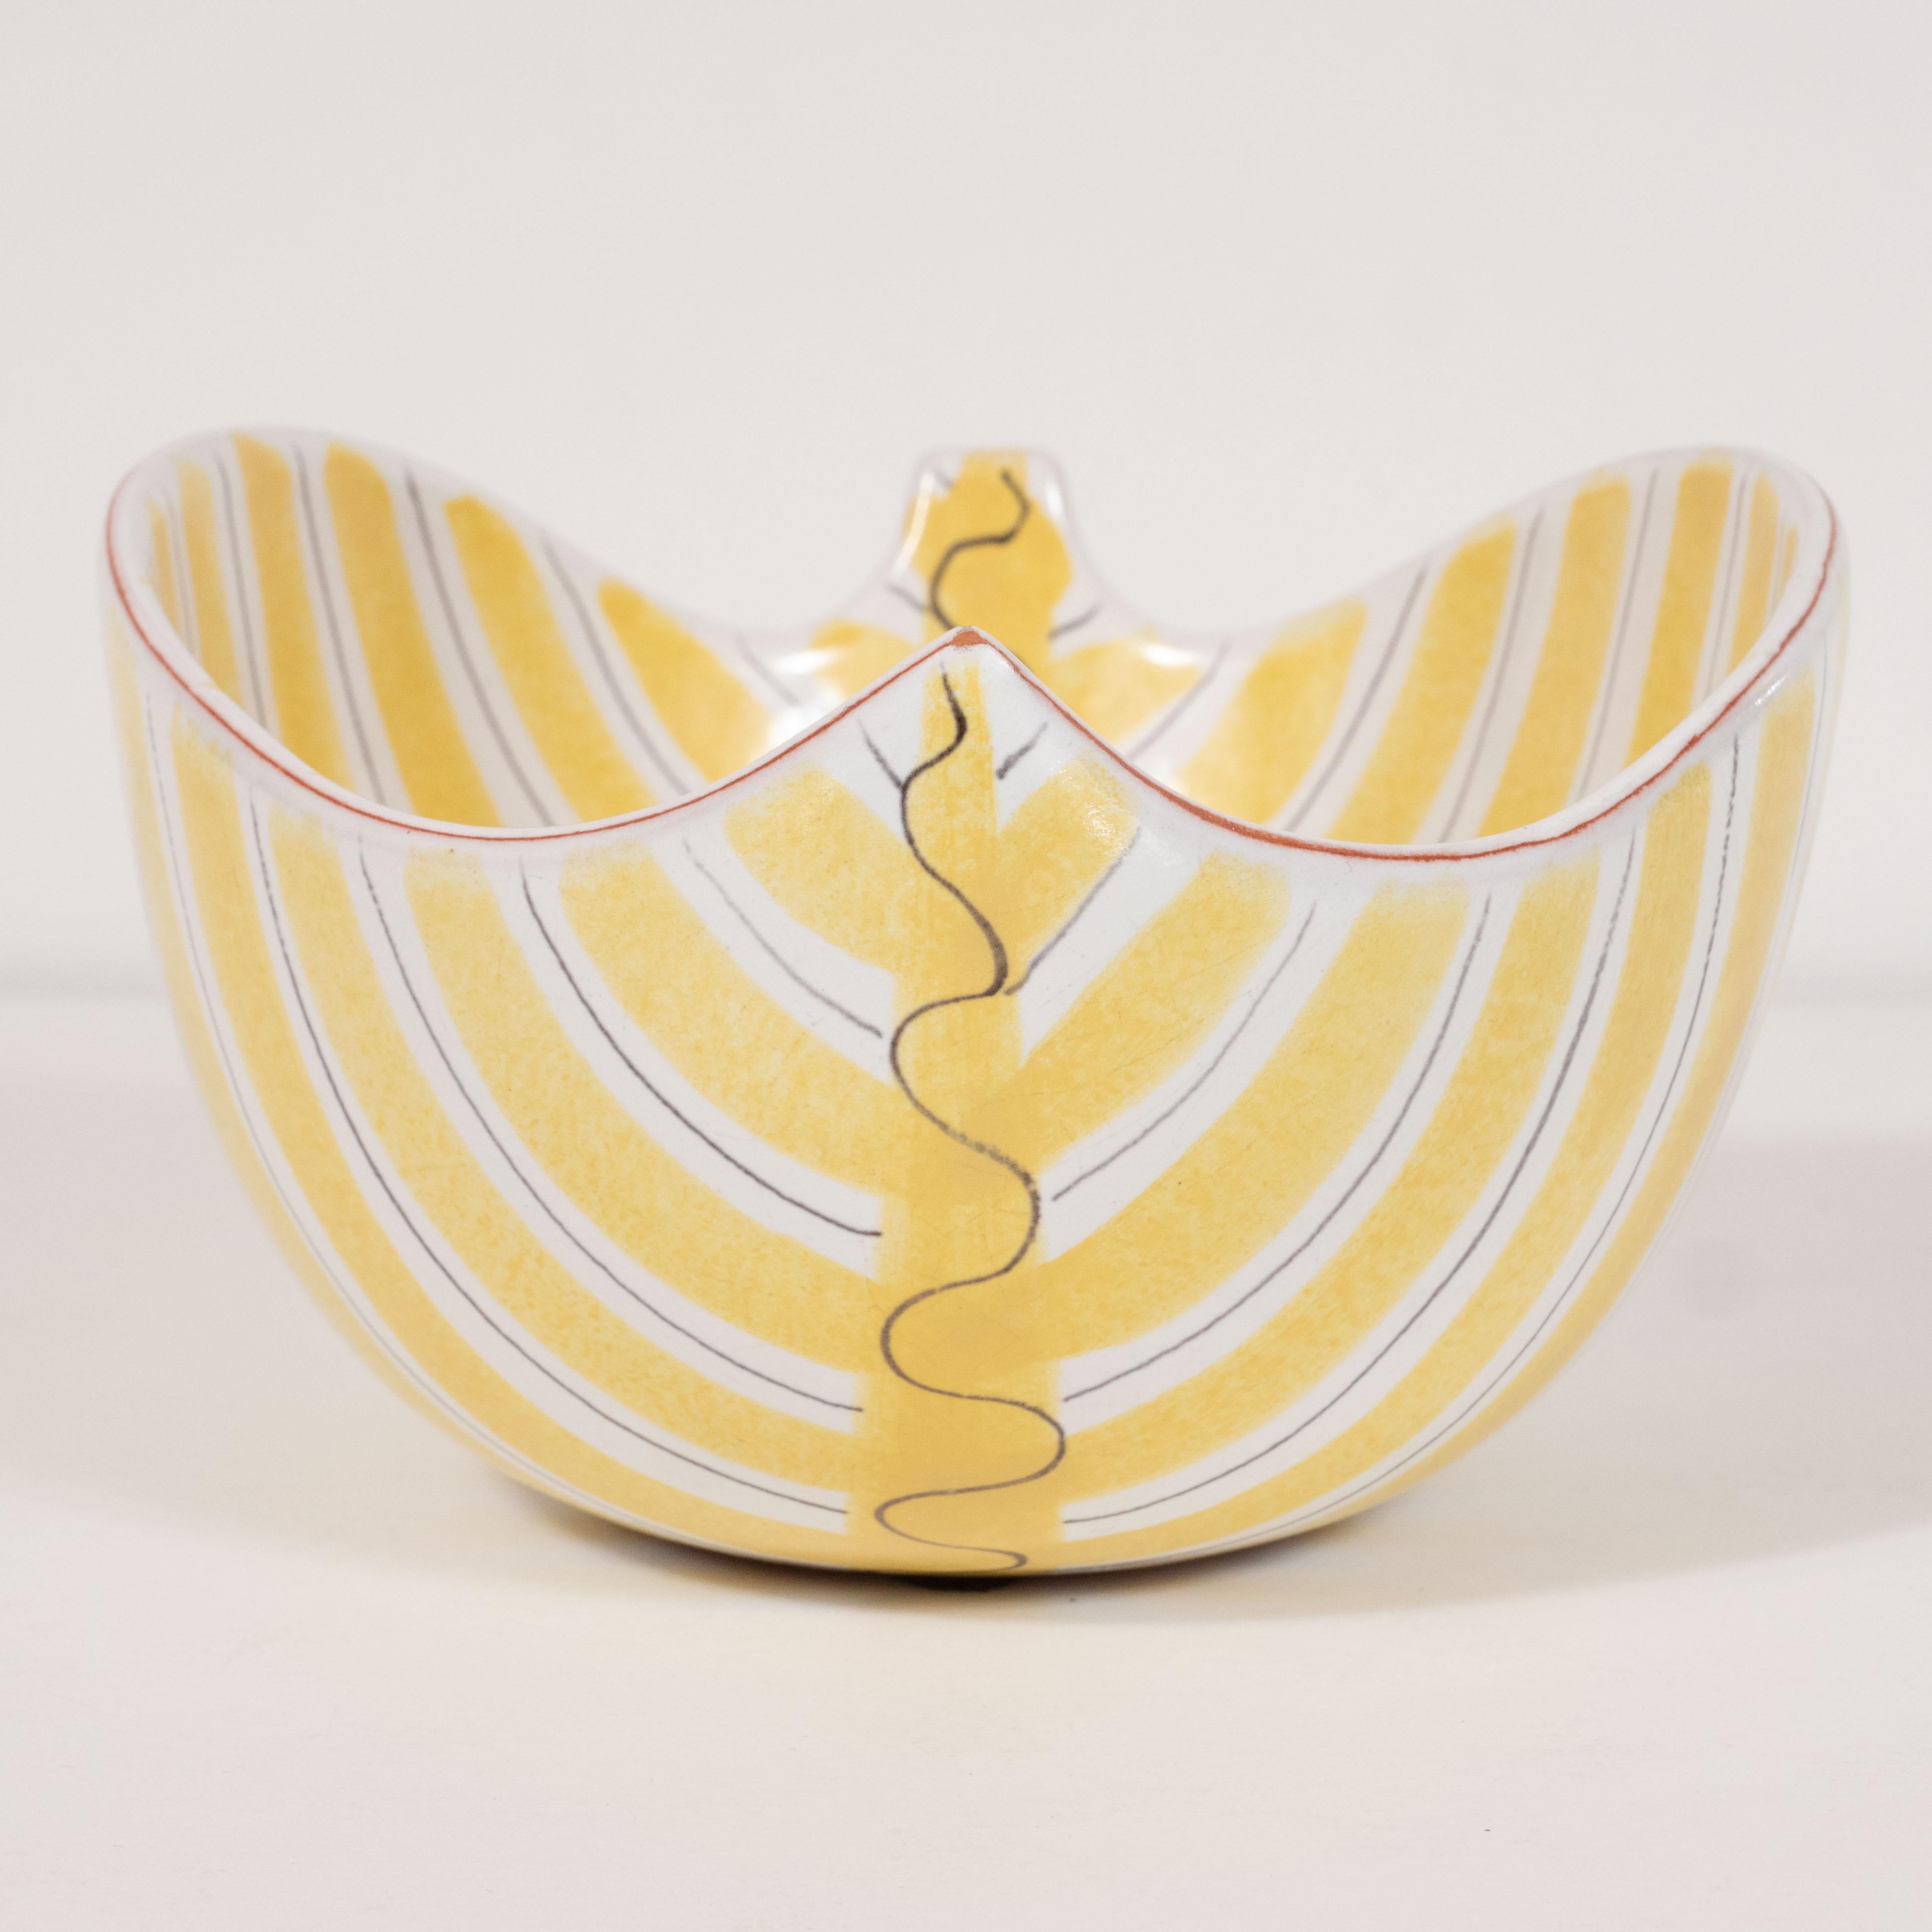 This sophisticated Mid-Century Modern bowl was realized by the esteemed Danish atelier of Per Linneman-Schmidt, circa 1960. It features a concave body with rounded sides, suggesting an abstracted sculptural leaf. The white body of the piece is